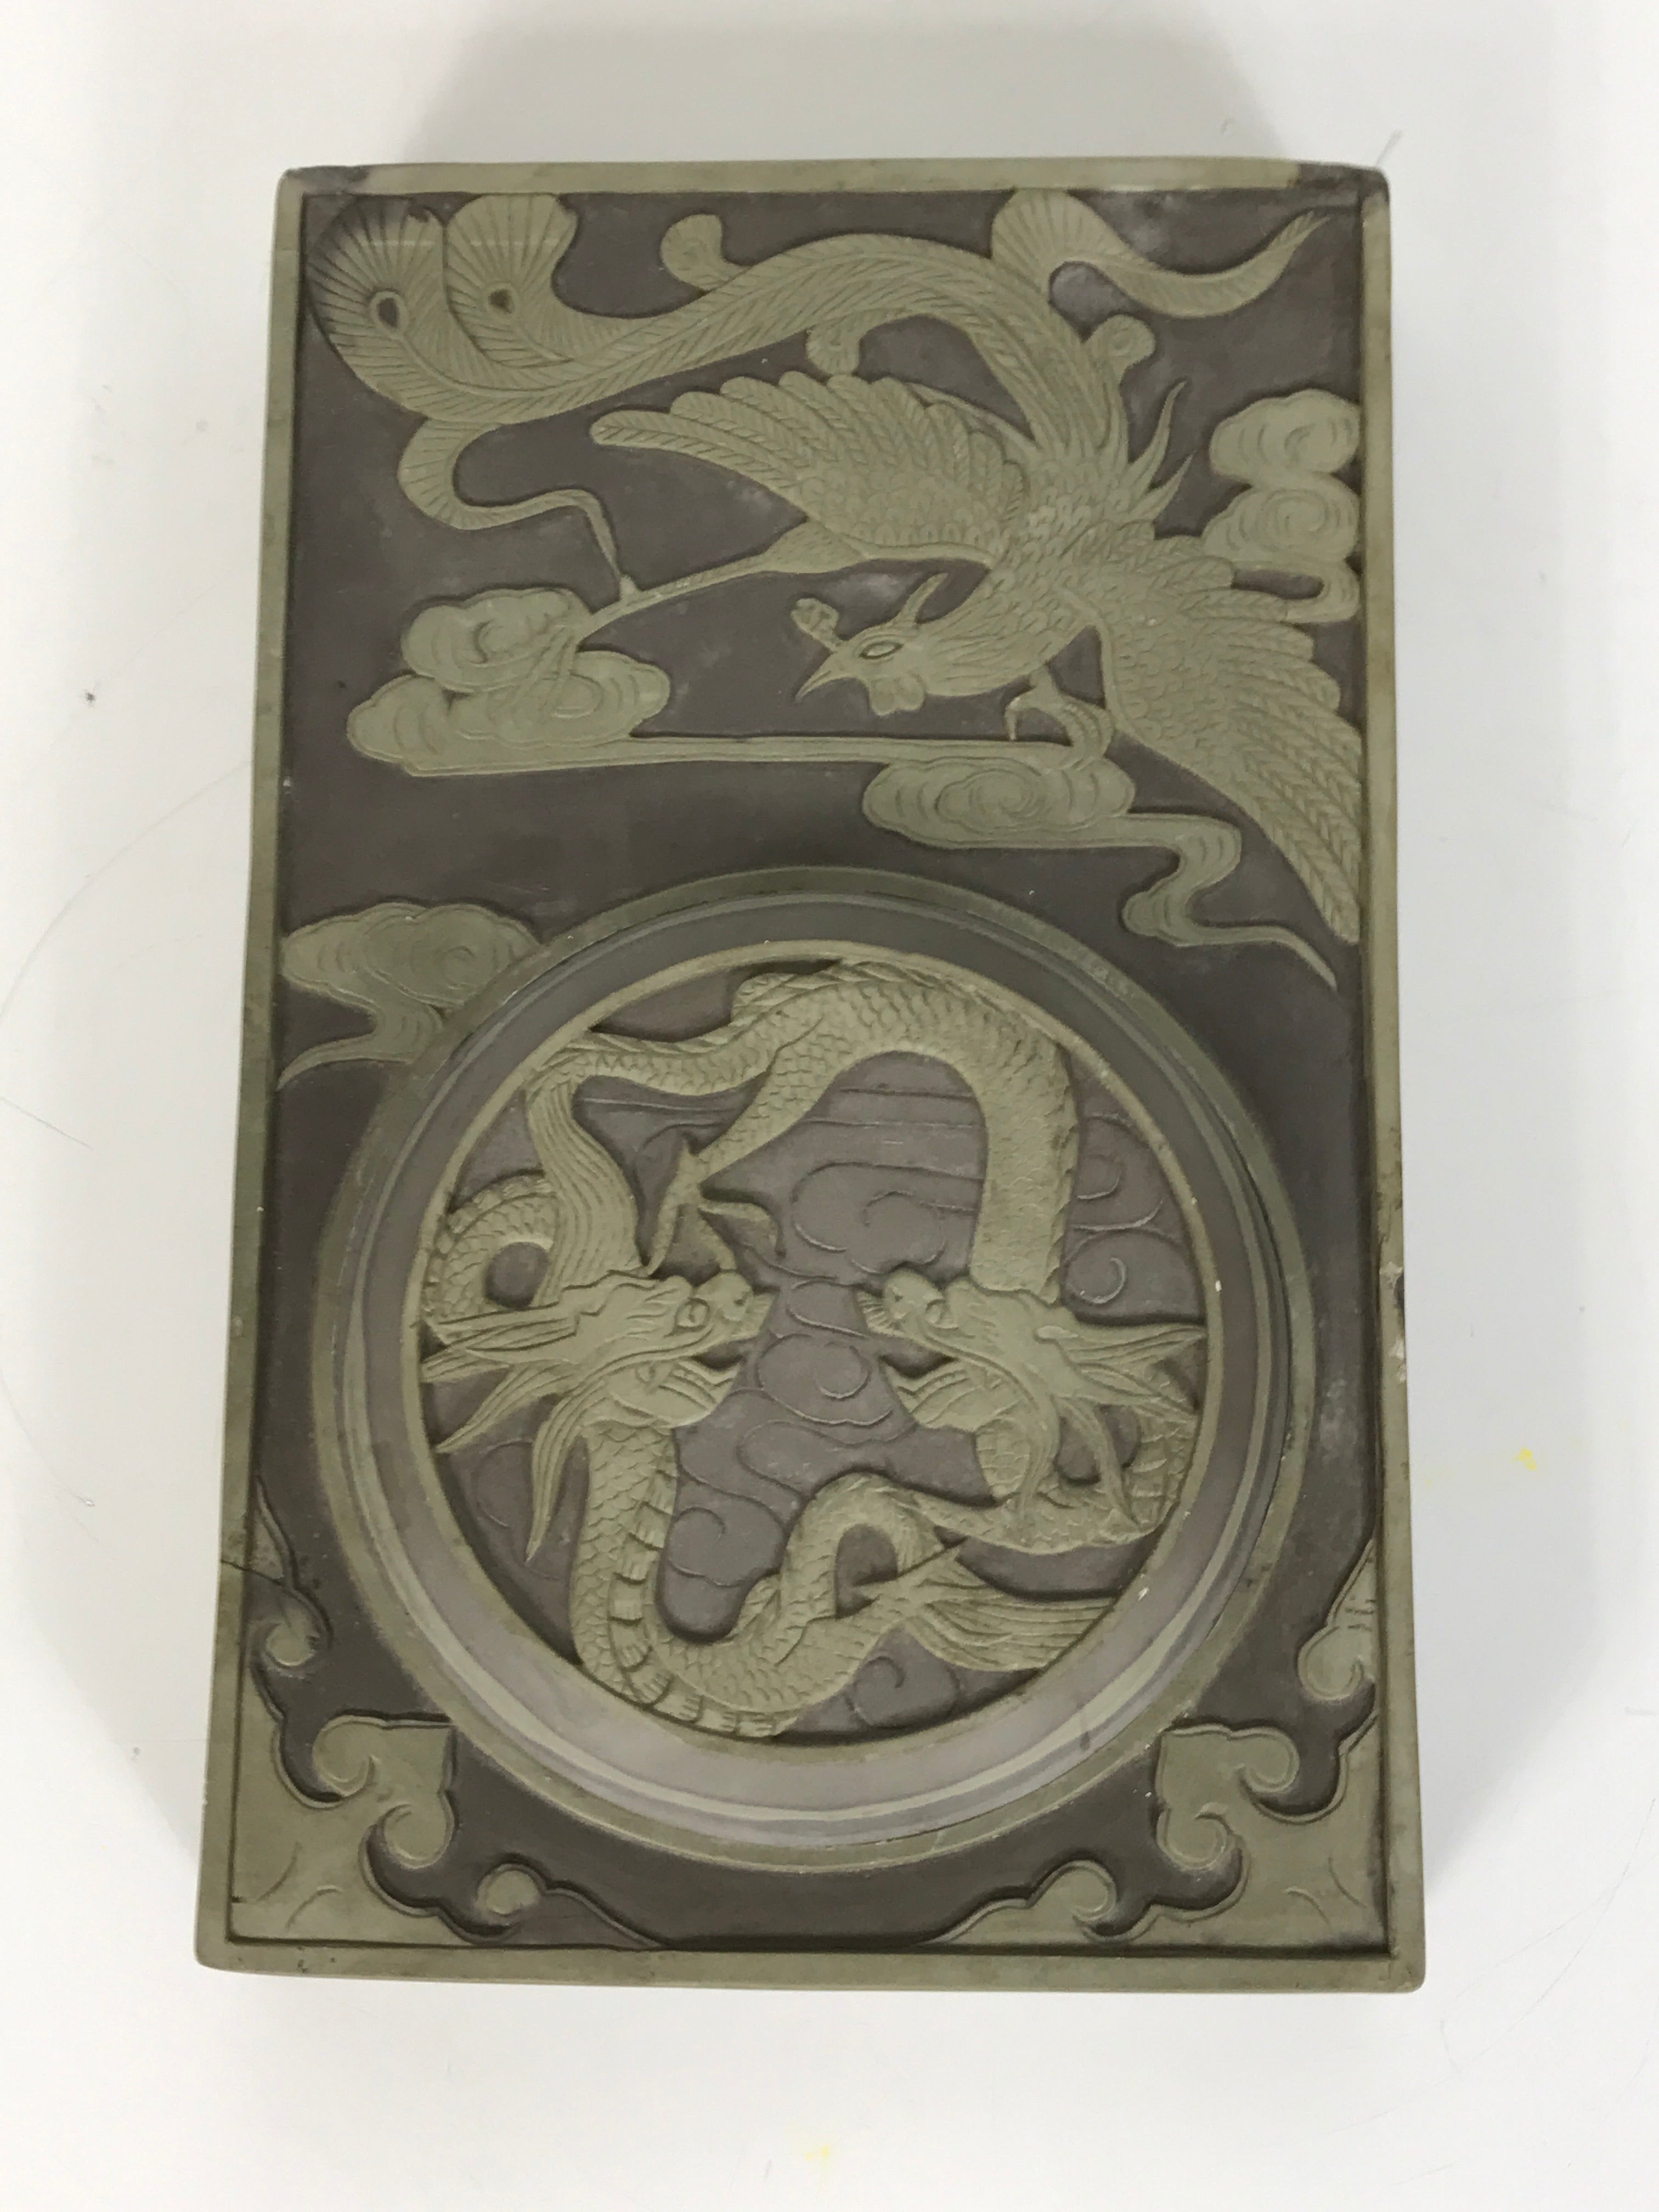 Large Chinese Ink Stone with Dragon and Peacock Motif